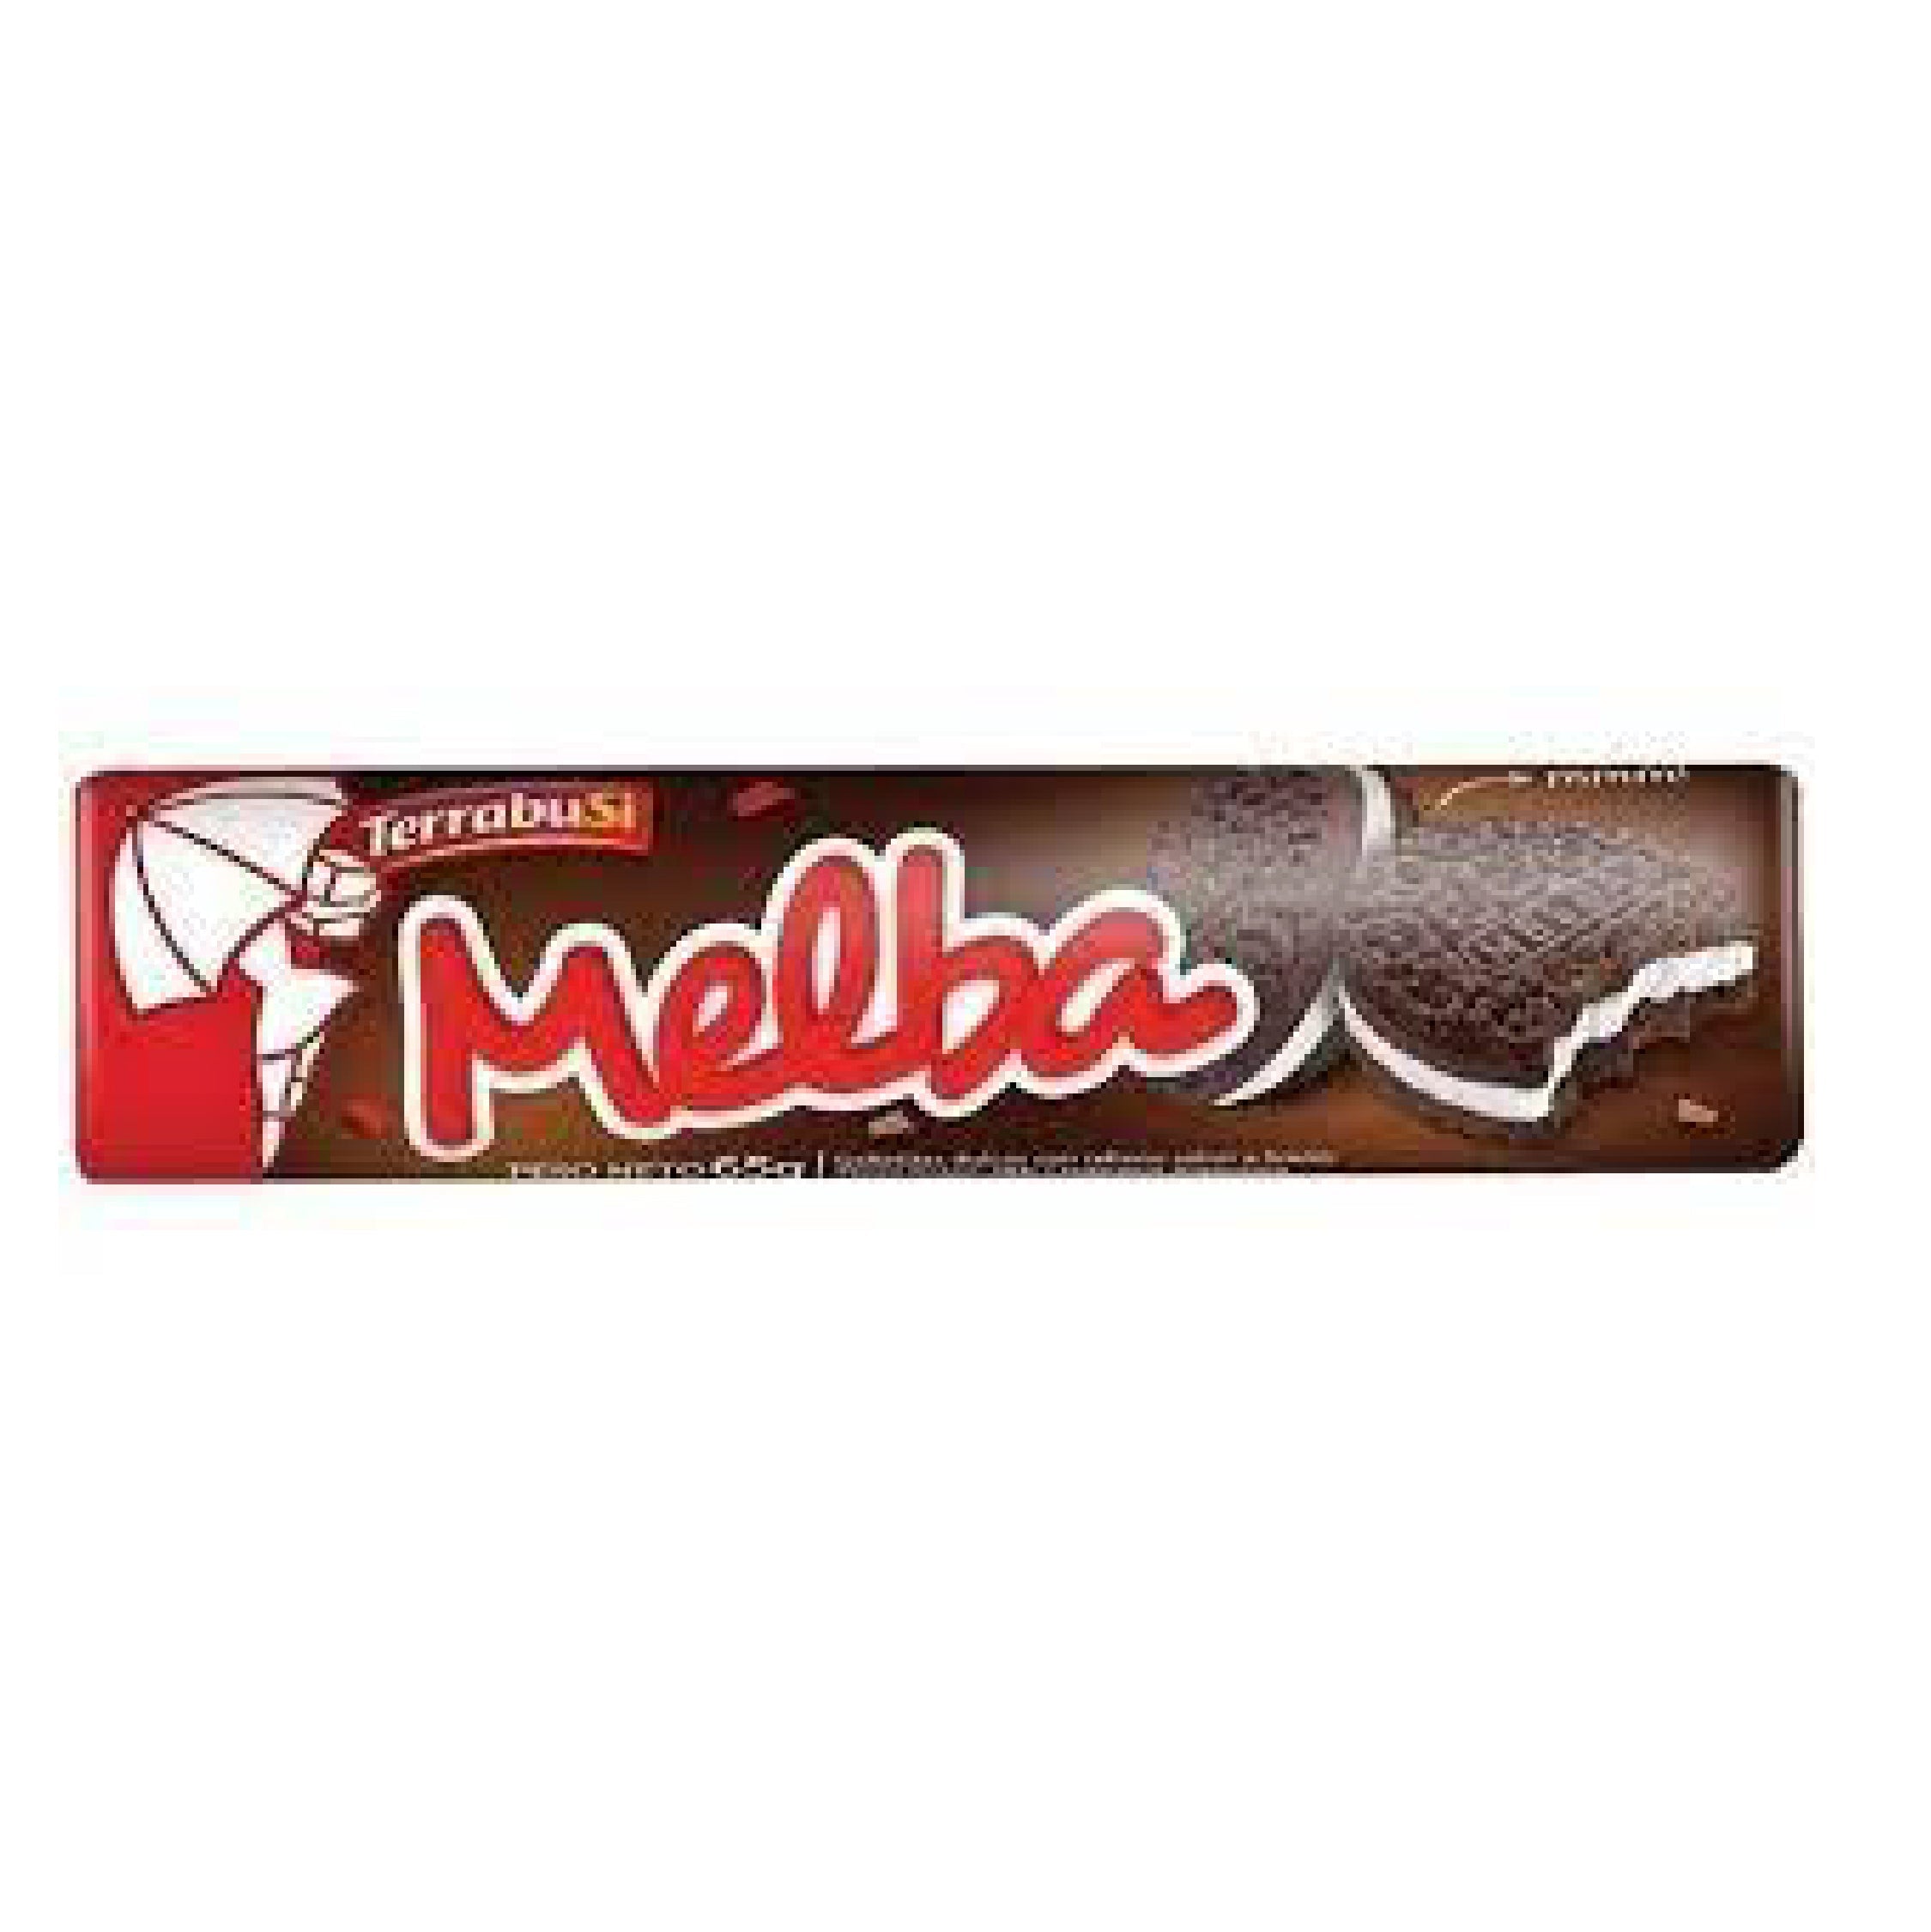 Galletita  Chocolate / Chocolate Cookie with lemon filling  MELBA 120 gr San Telmo Market, Argentine Grocery & Restaurant, We Ship All Over USA and CANADA